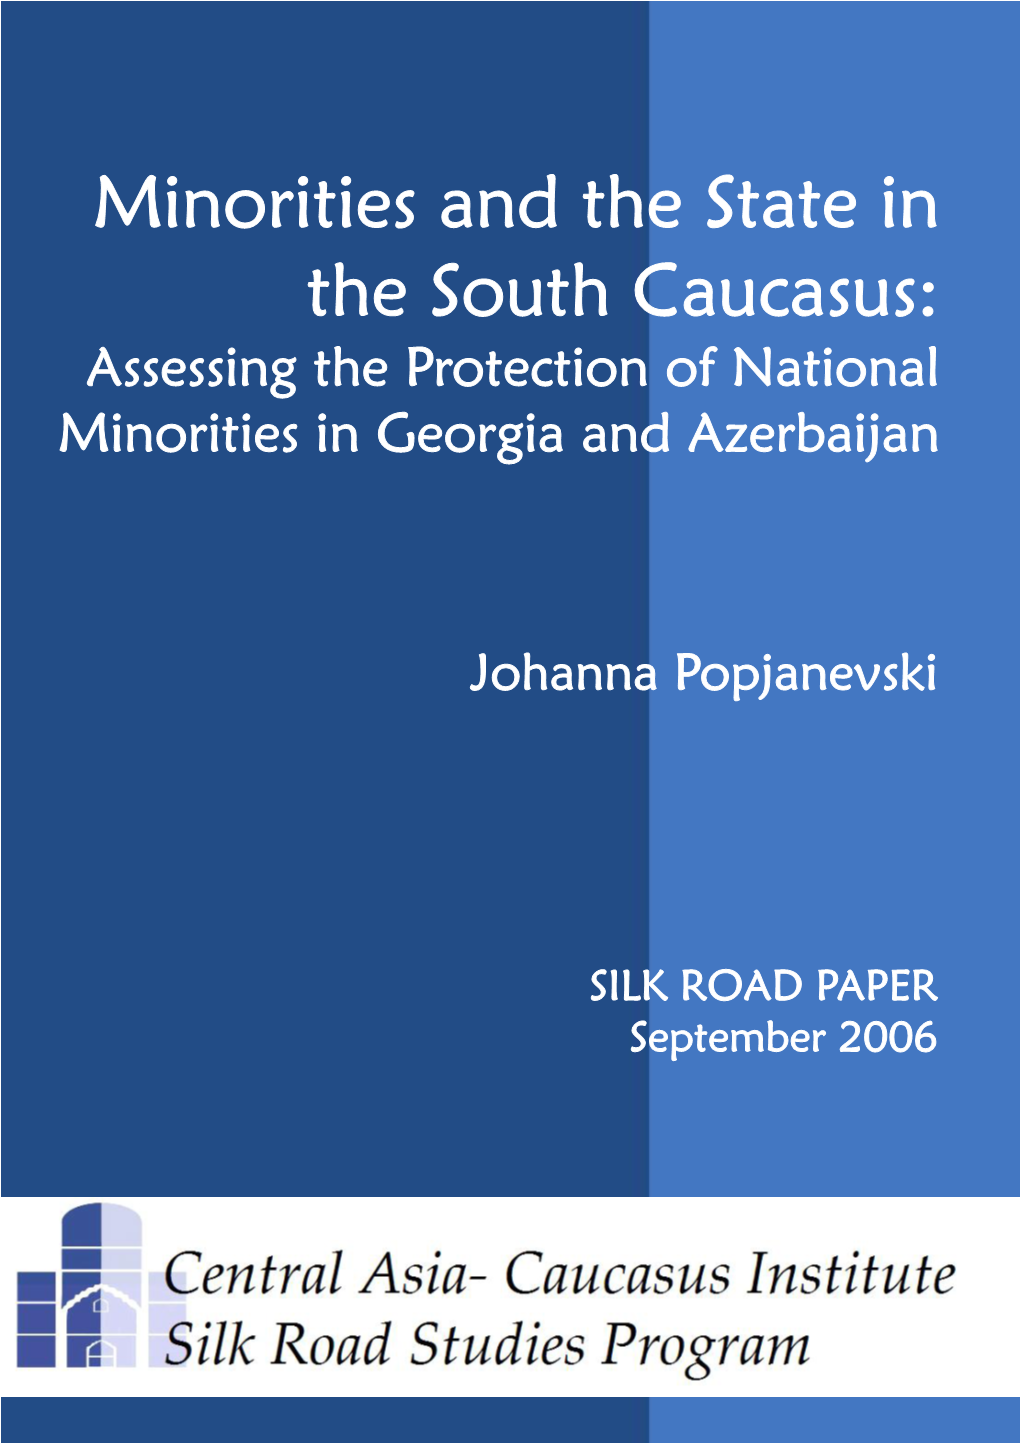 Minorities and the State in the South Caucasus: Assessing the Protection of National Minorities in Georgia and Azerbaijan